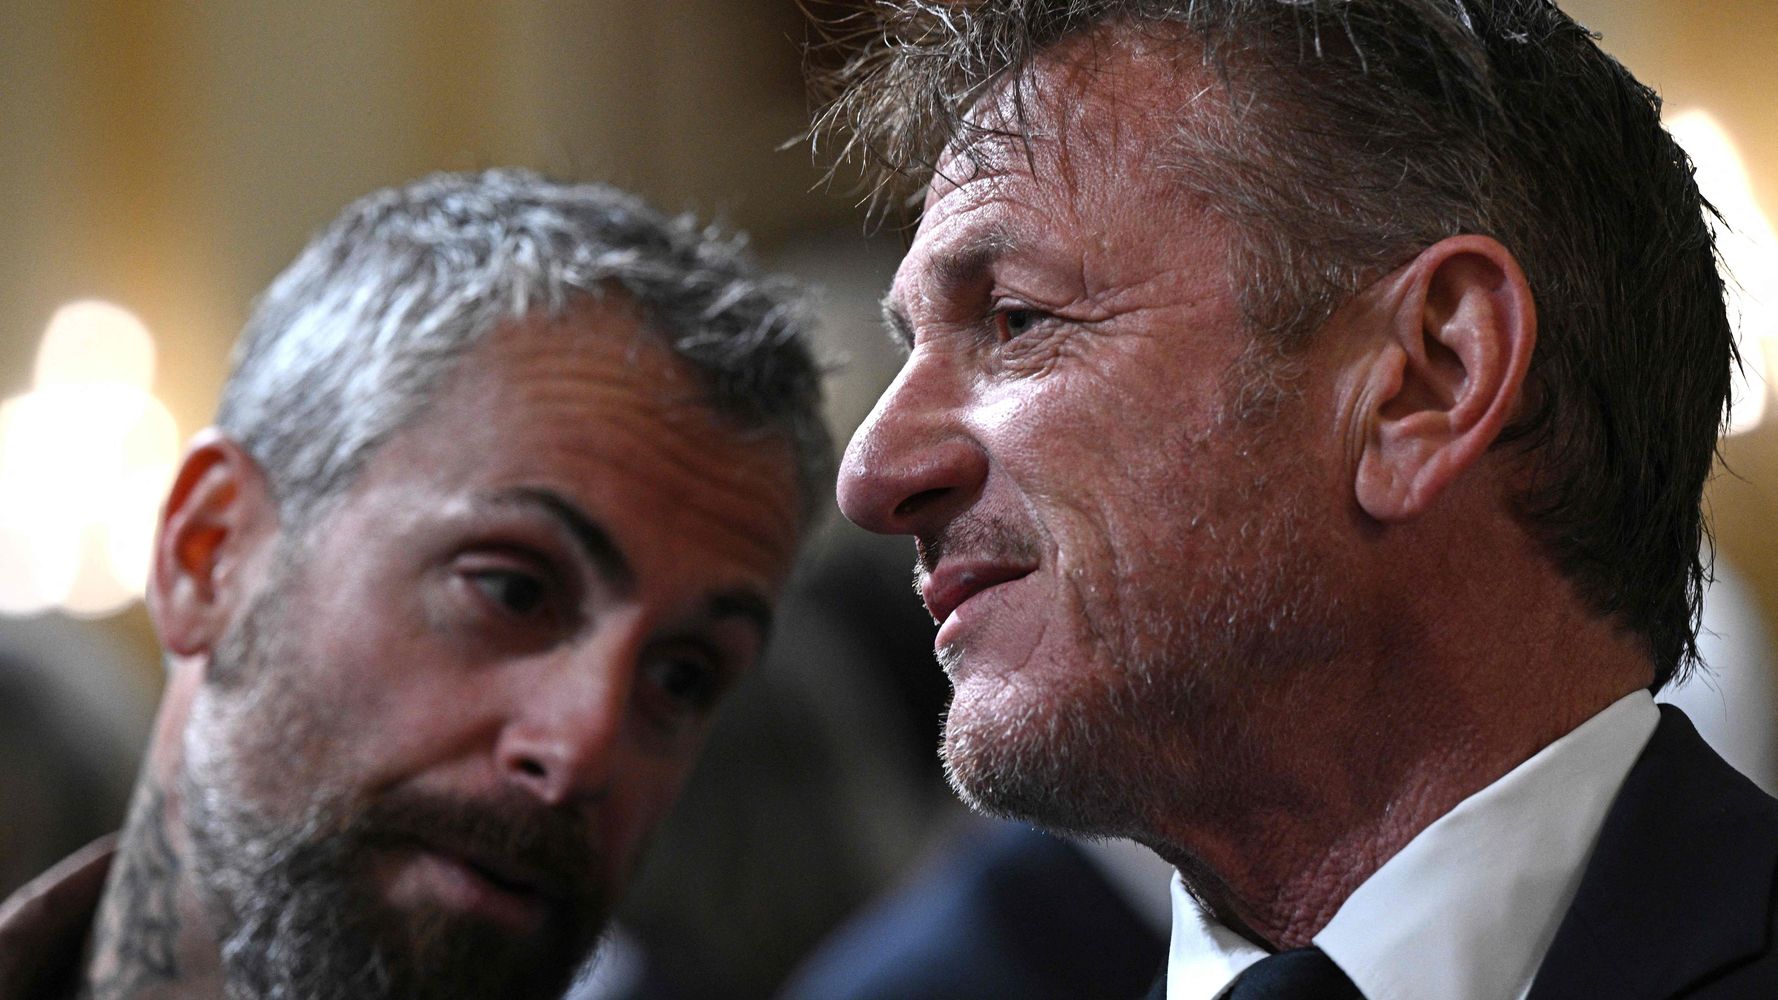 Sean Penn Sits With U.S. Capitol Police Officers During Jan. 6 Hearing